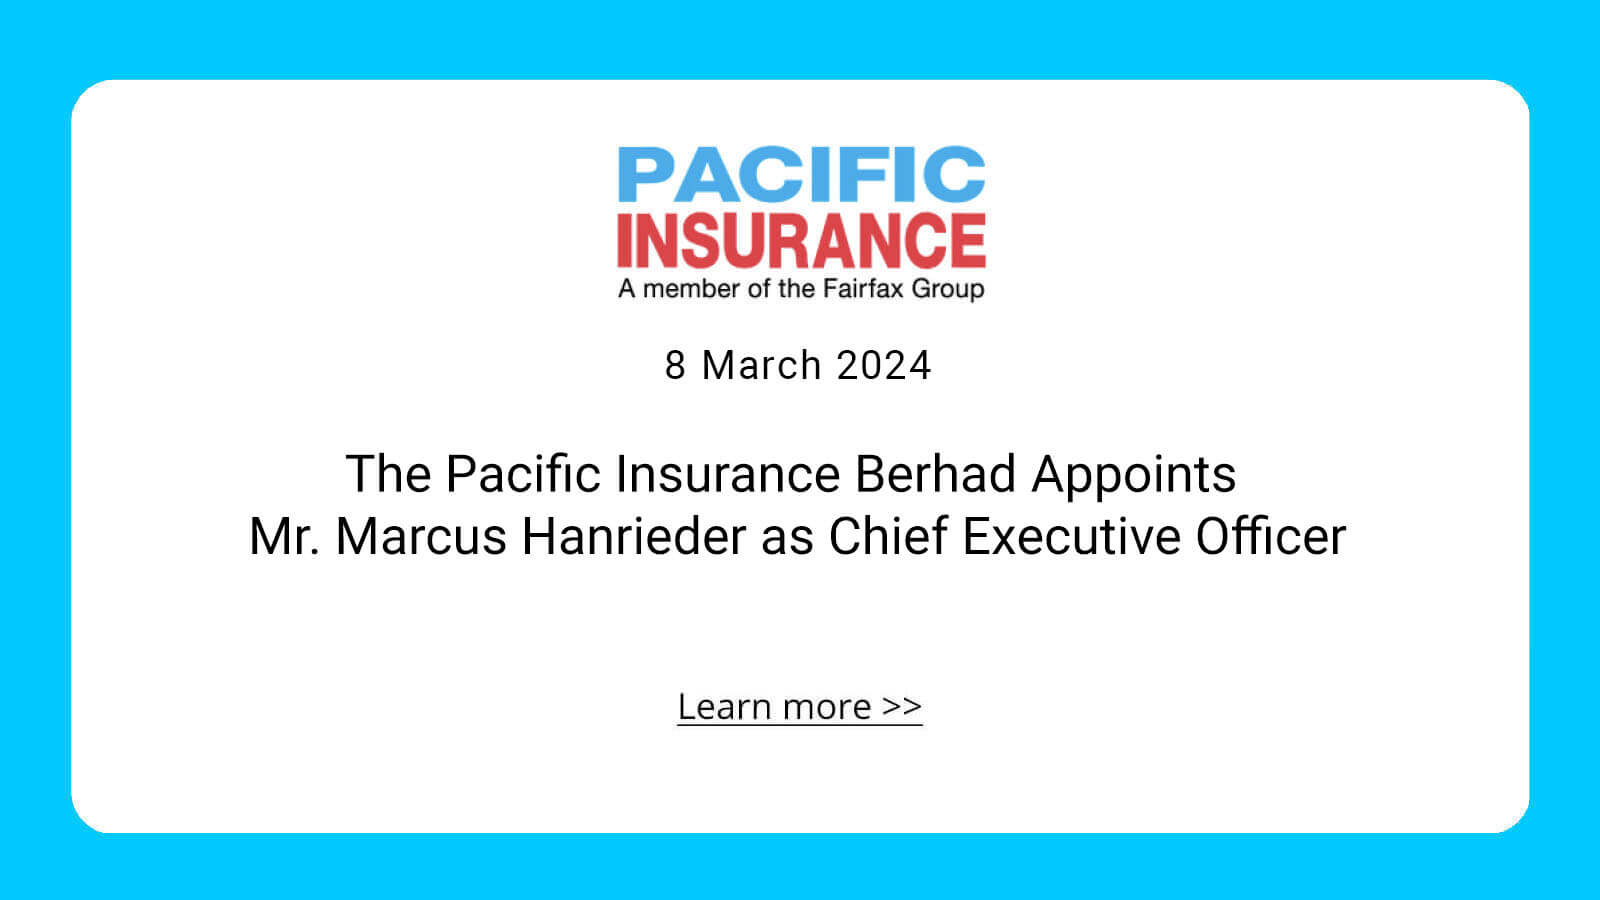 The Pacific Insurance Berhad Appoints Mr. Marcus Hanrieder as Chief Executive Officer